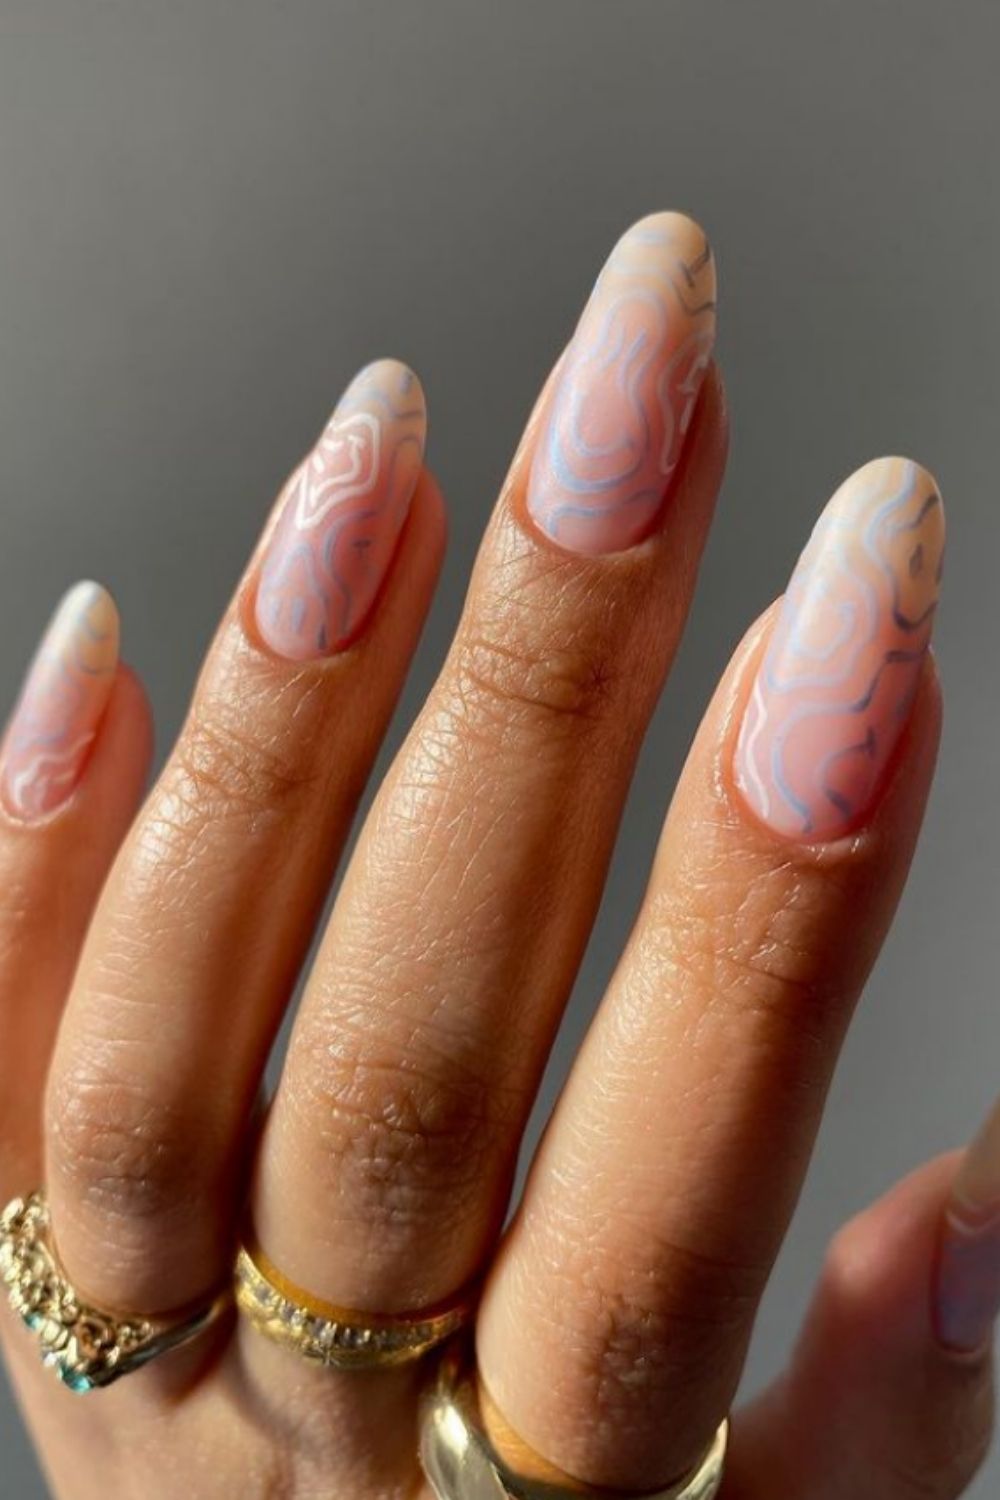 Nude nails | stunning natural nail designs you're going to want to try ASAP